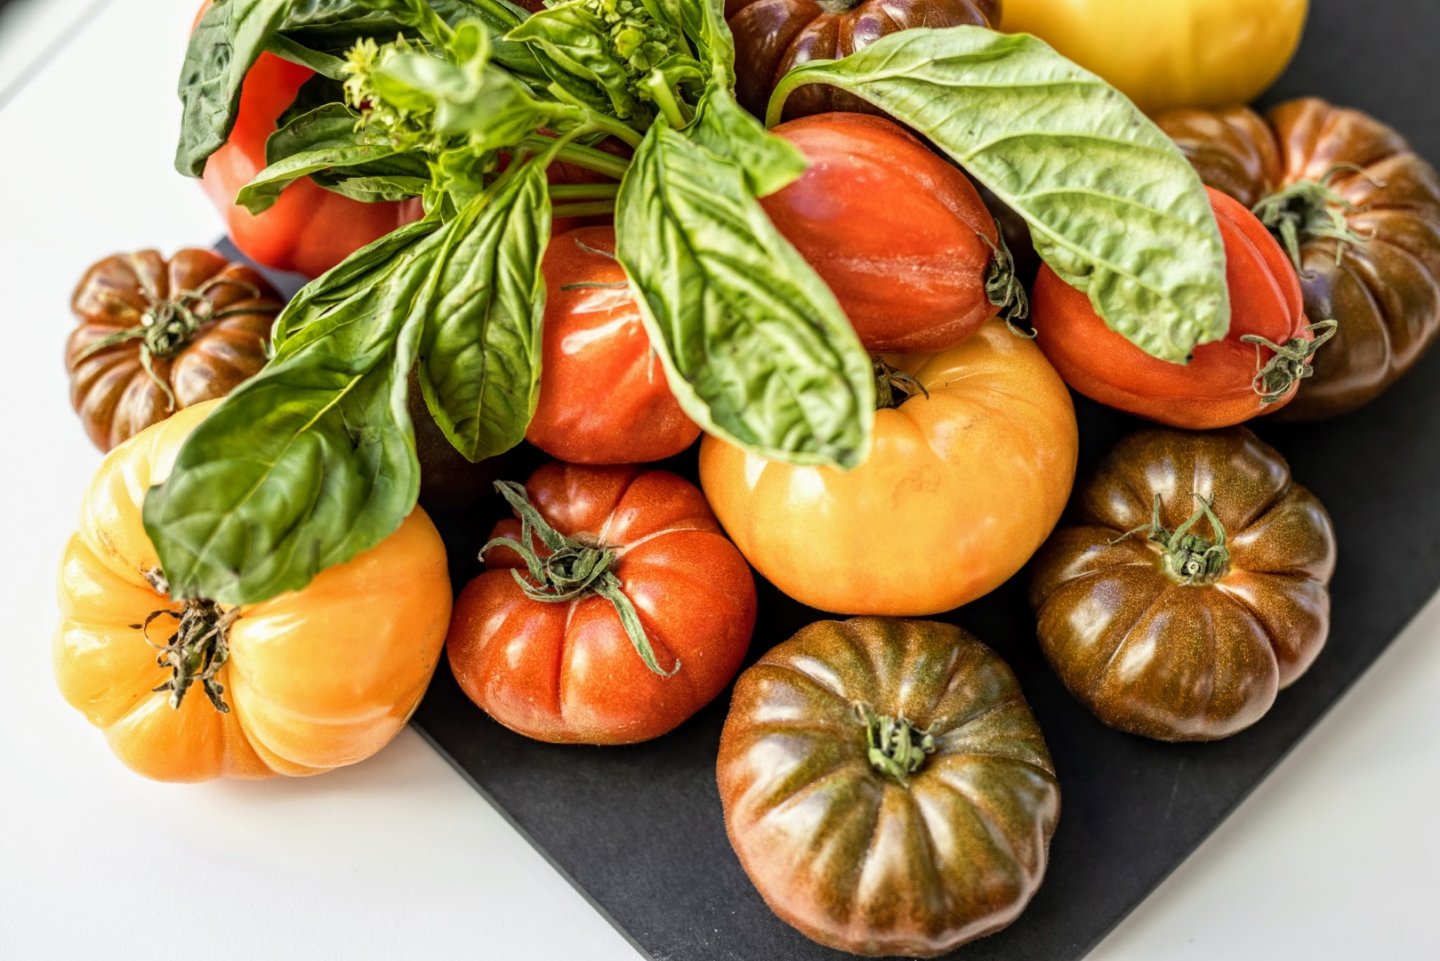 a pile of different types of tomatoes on a table.